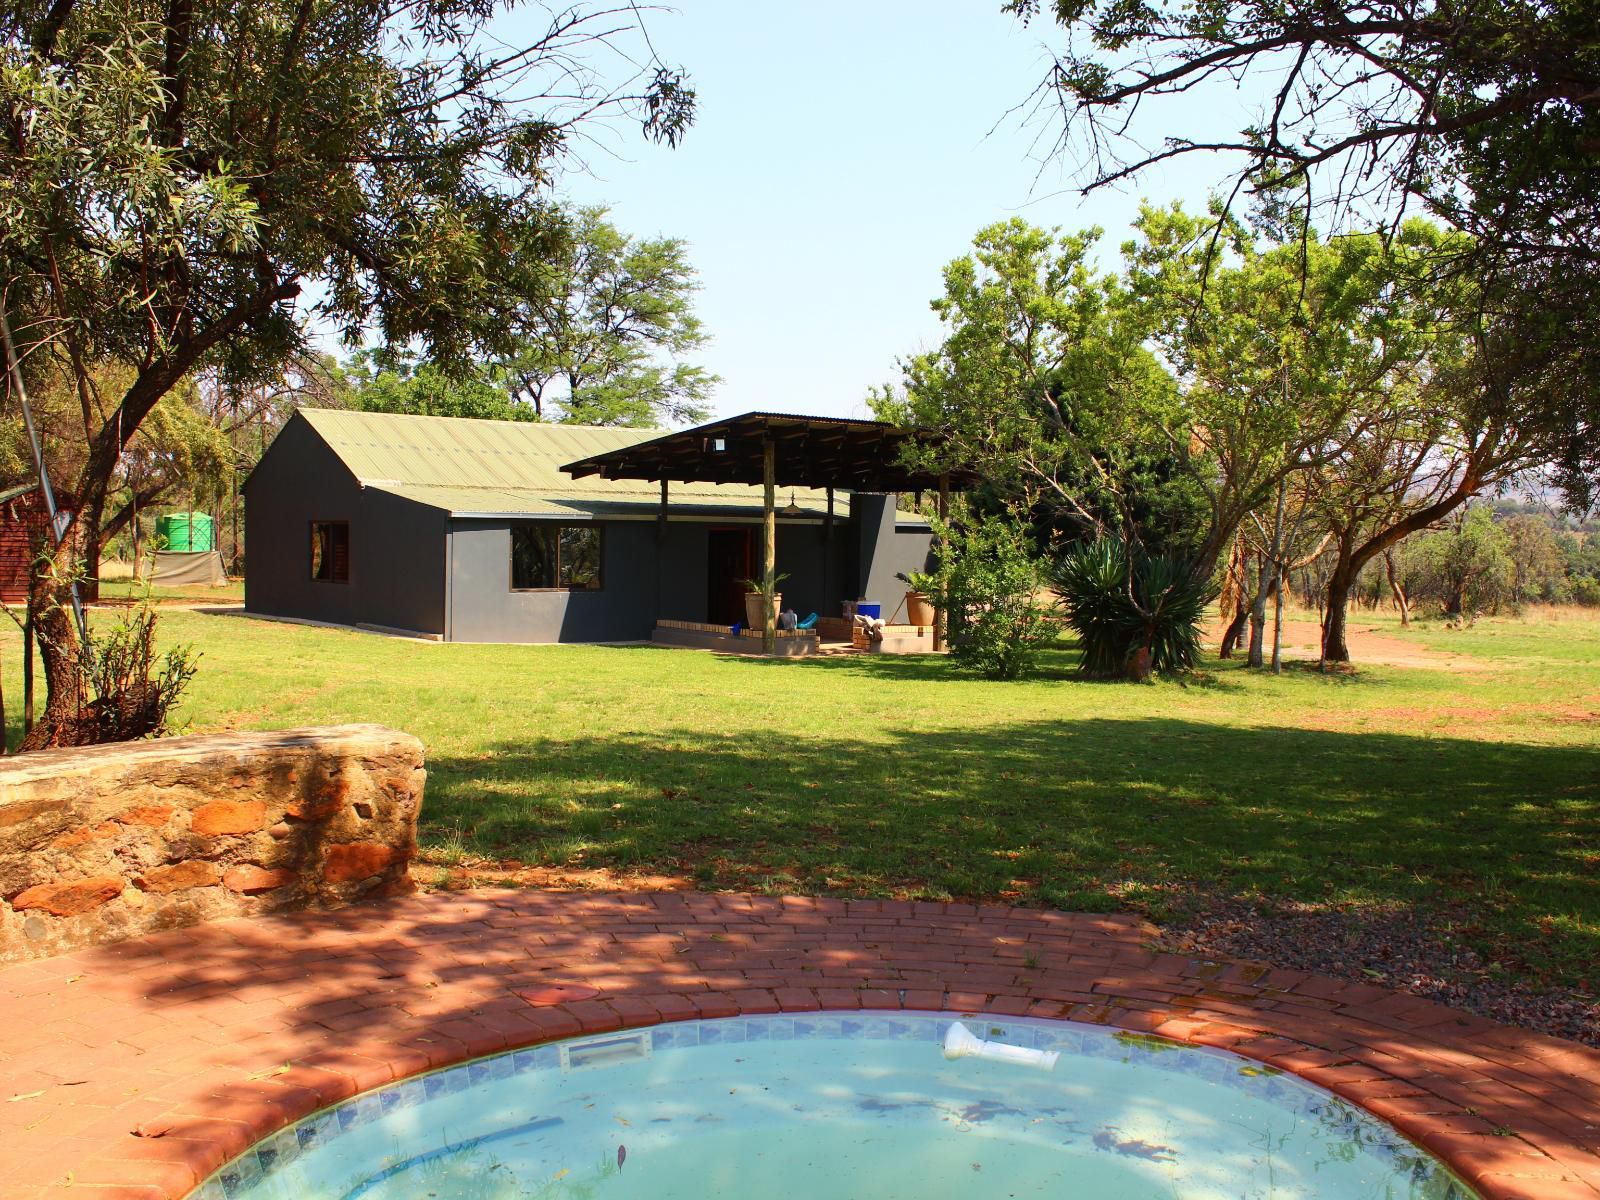 Wilgeboomsdrift Safaris Modimolle Nylstroom Limpopo Province South Africa 